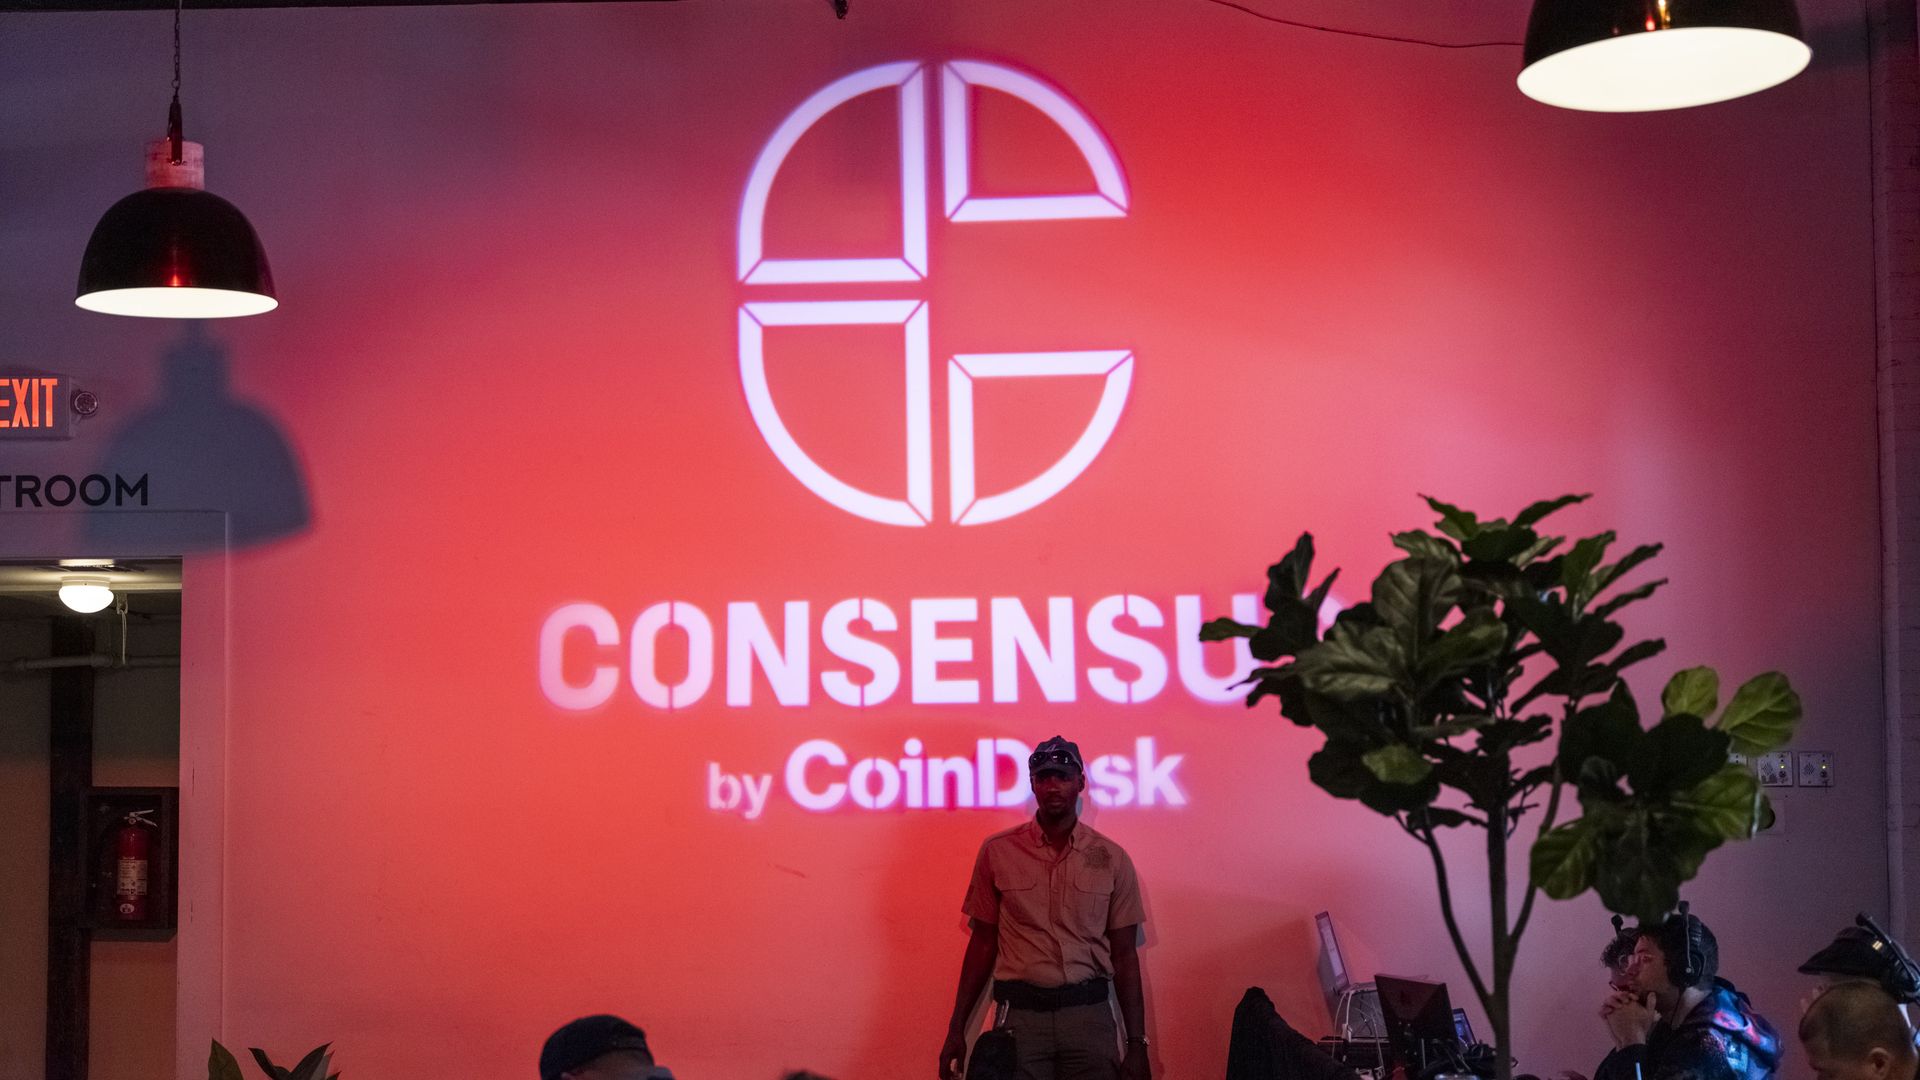 A person standing in front of a red wall with the logo for Consensus.